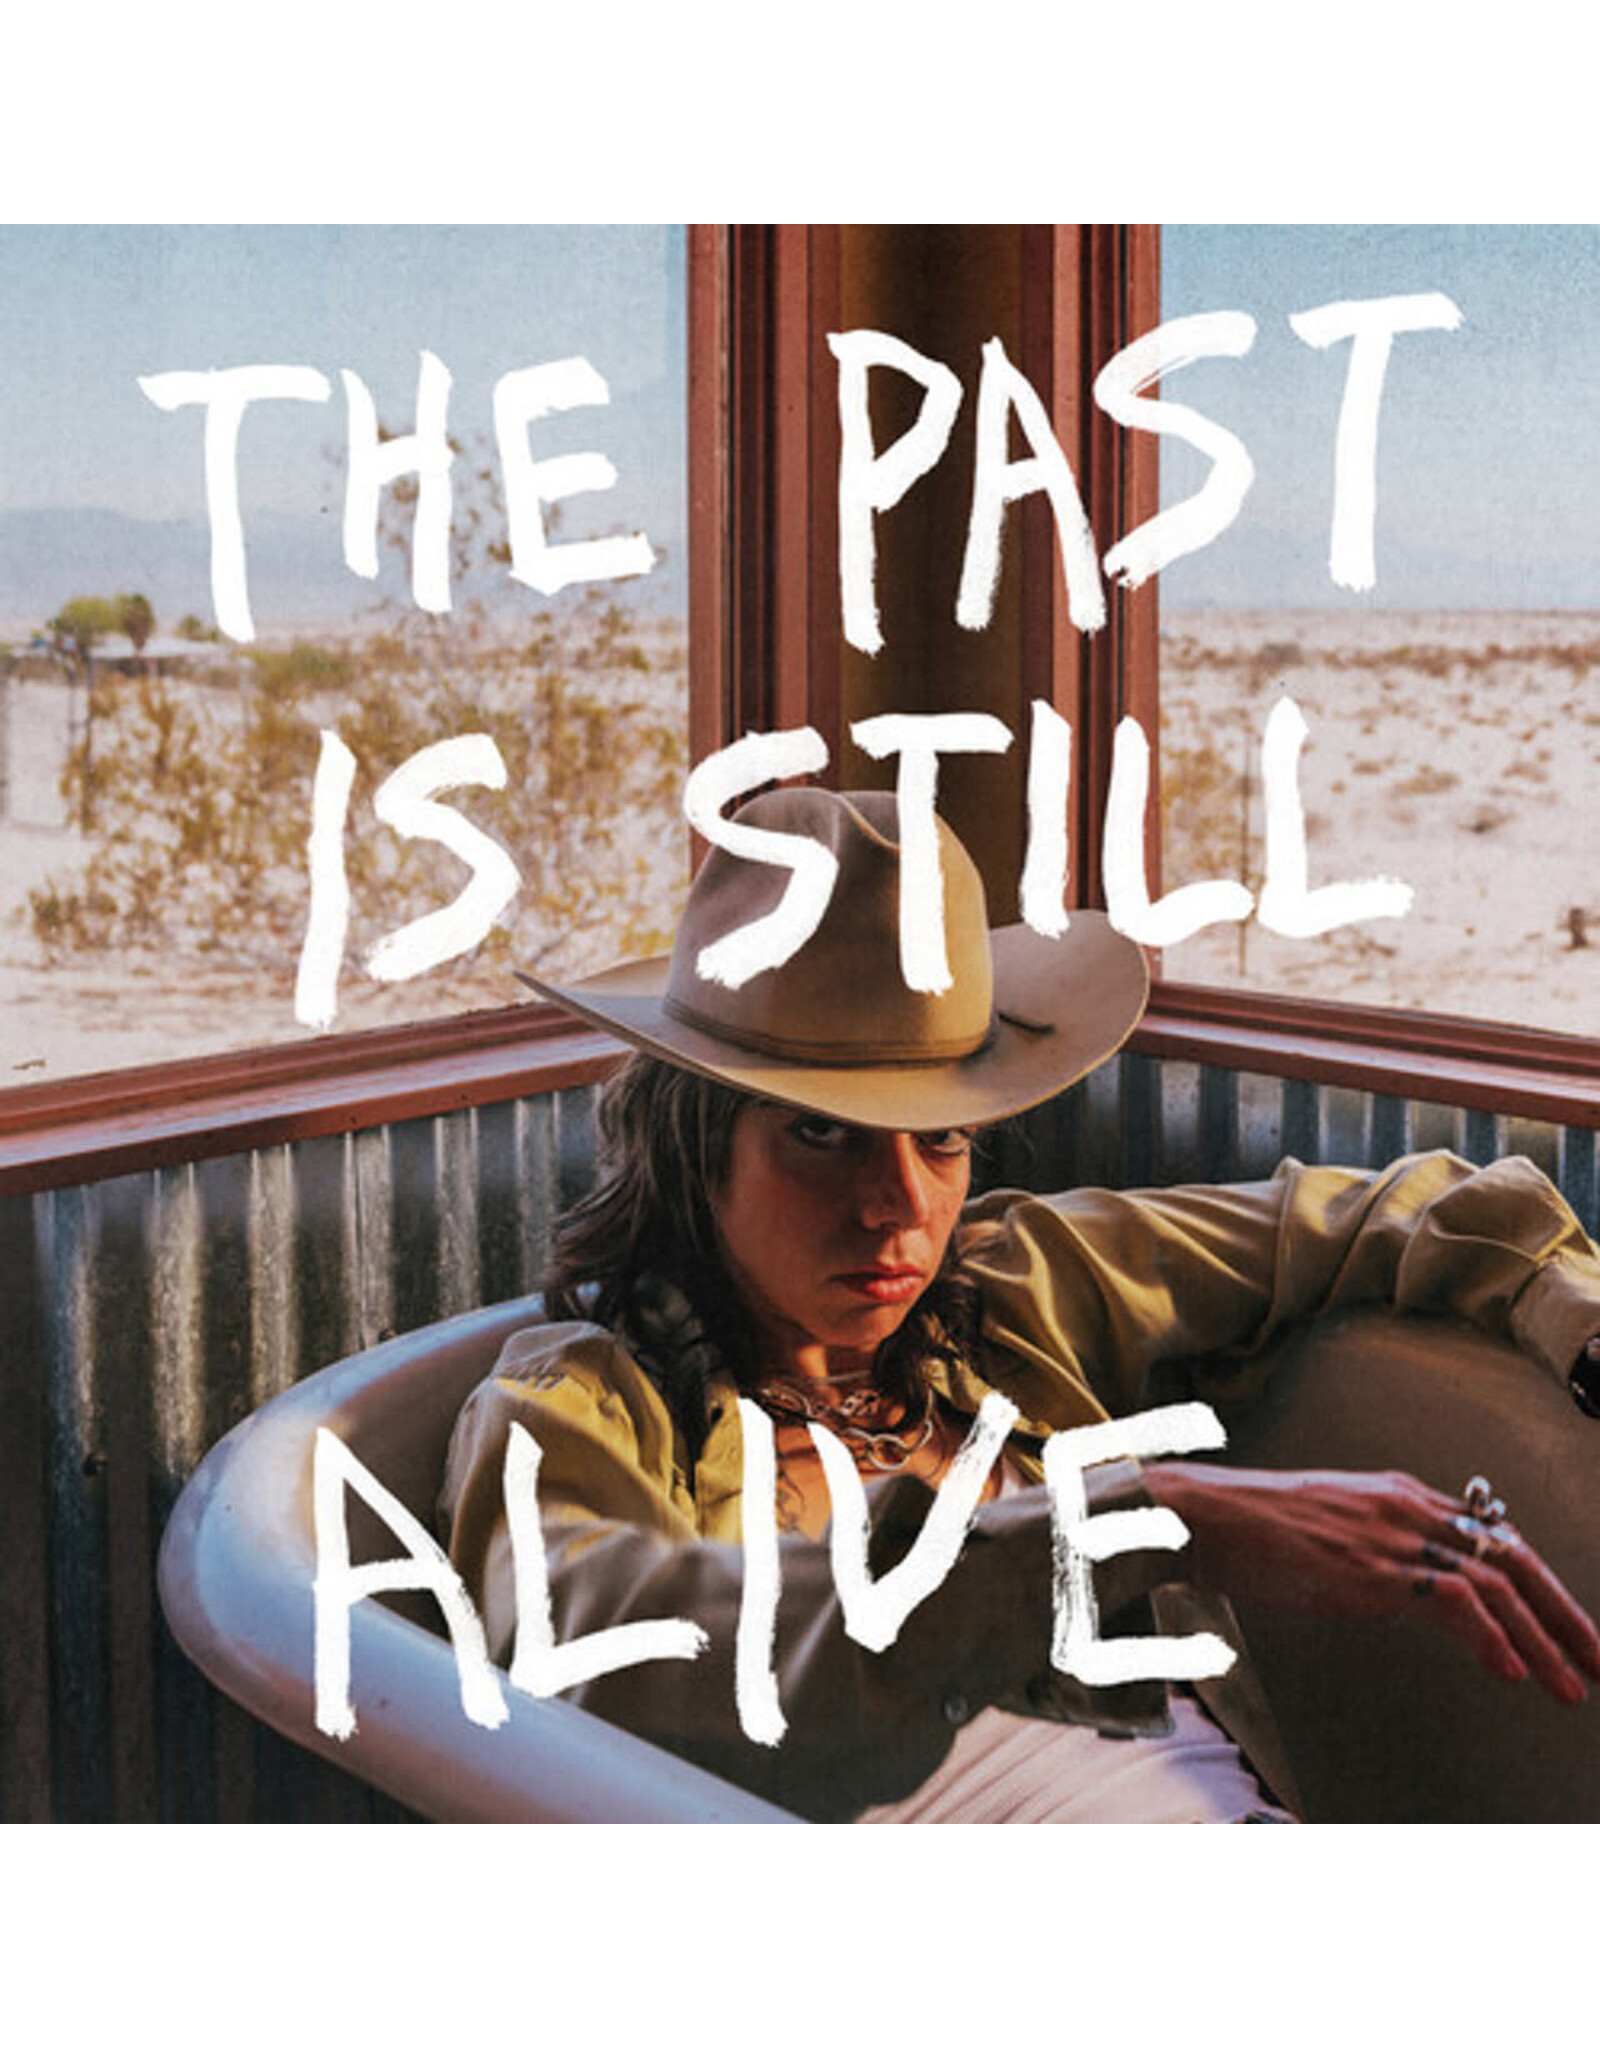 Hurray For The Riff Raff - The Past Is Still Alive (Exclusive Orange Vinyl)